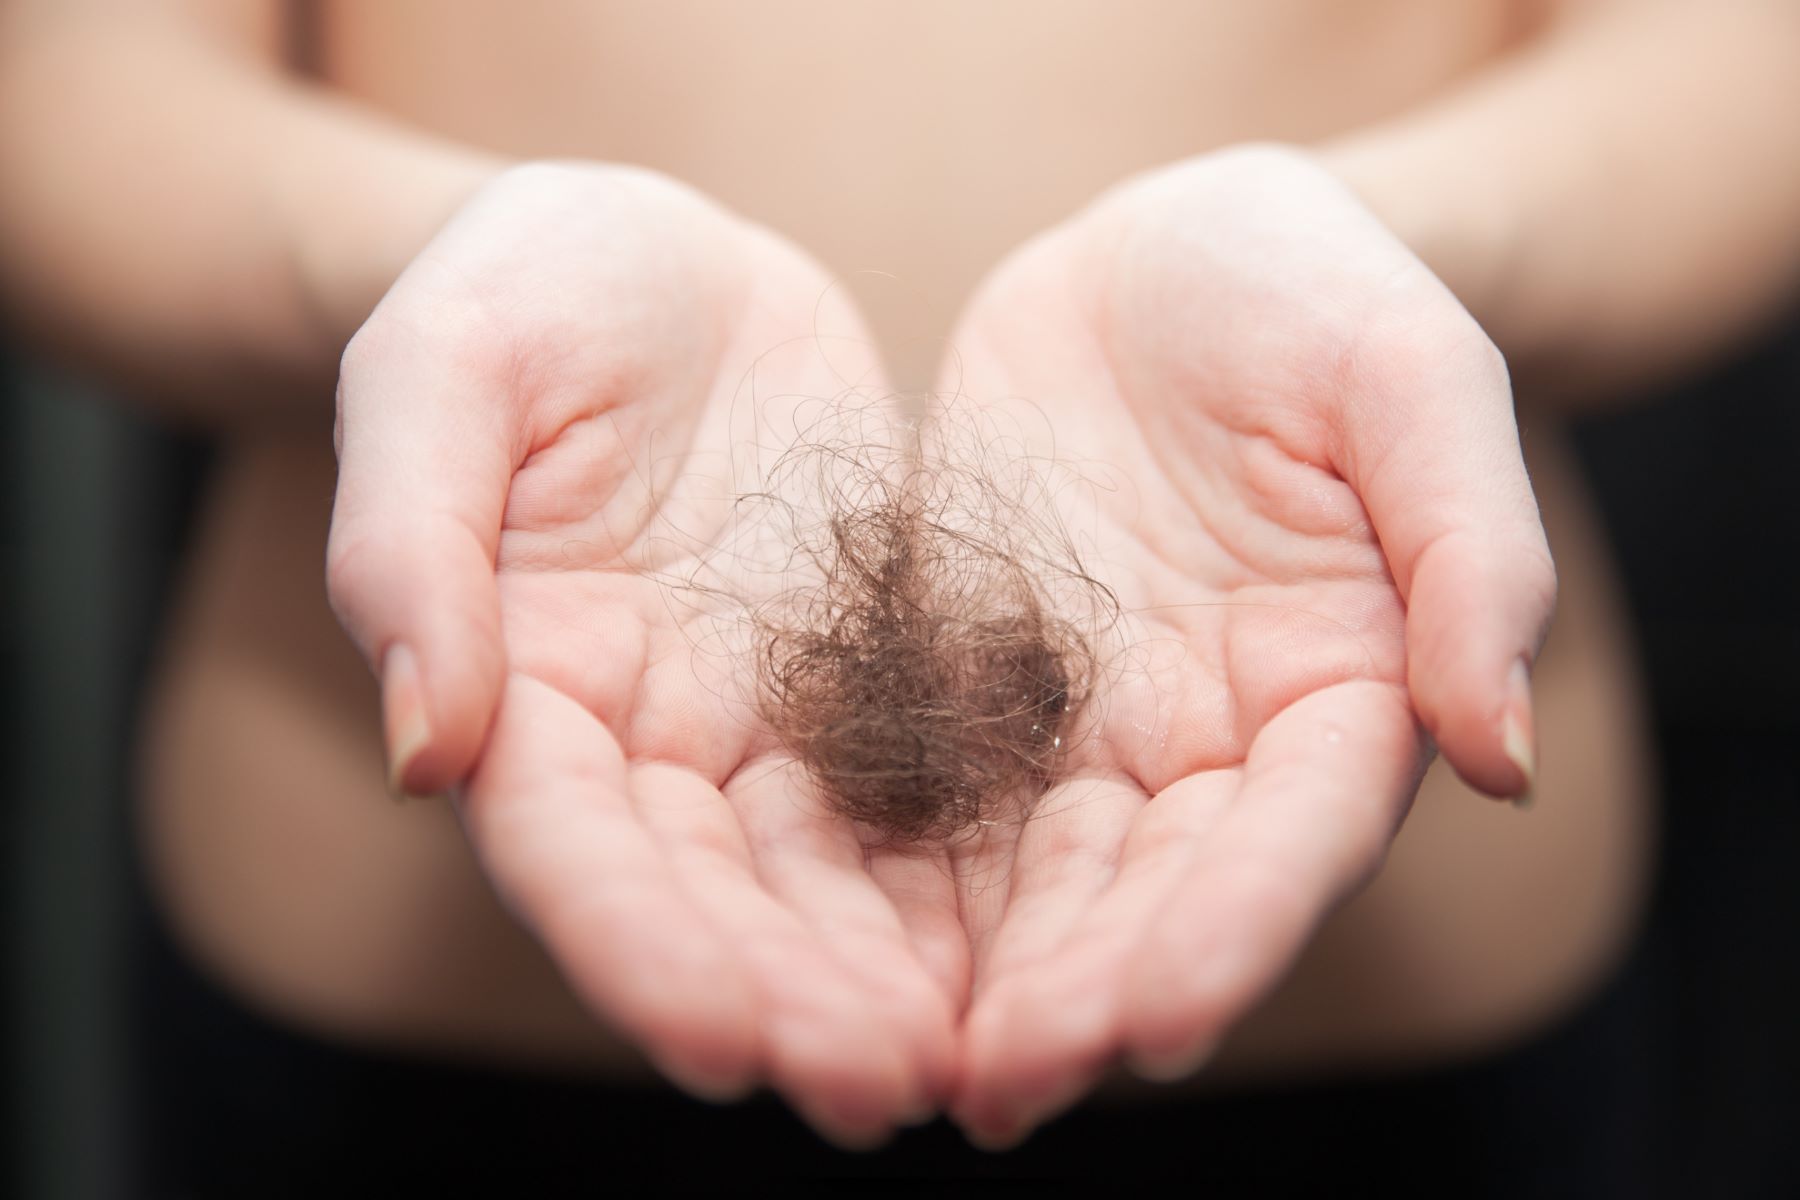 Do steroid injections cause hair loss?